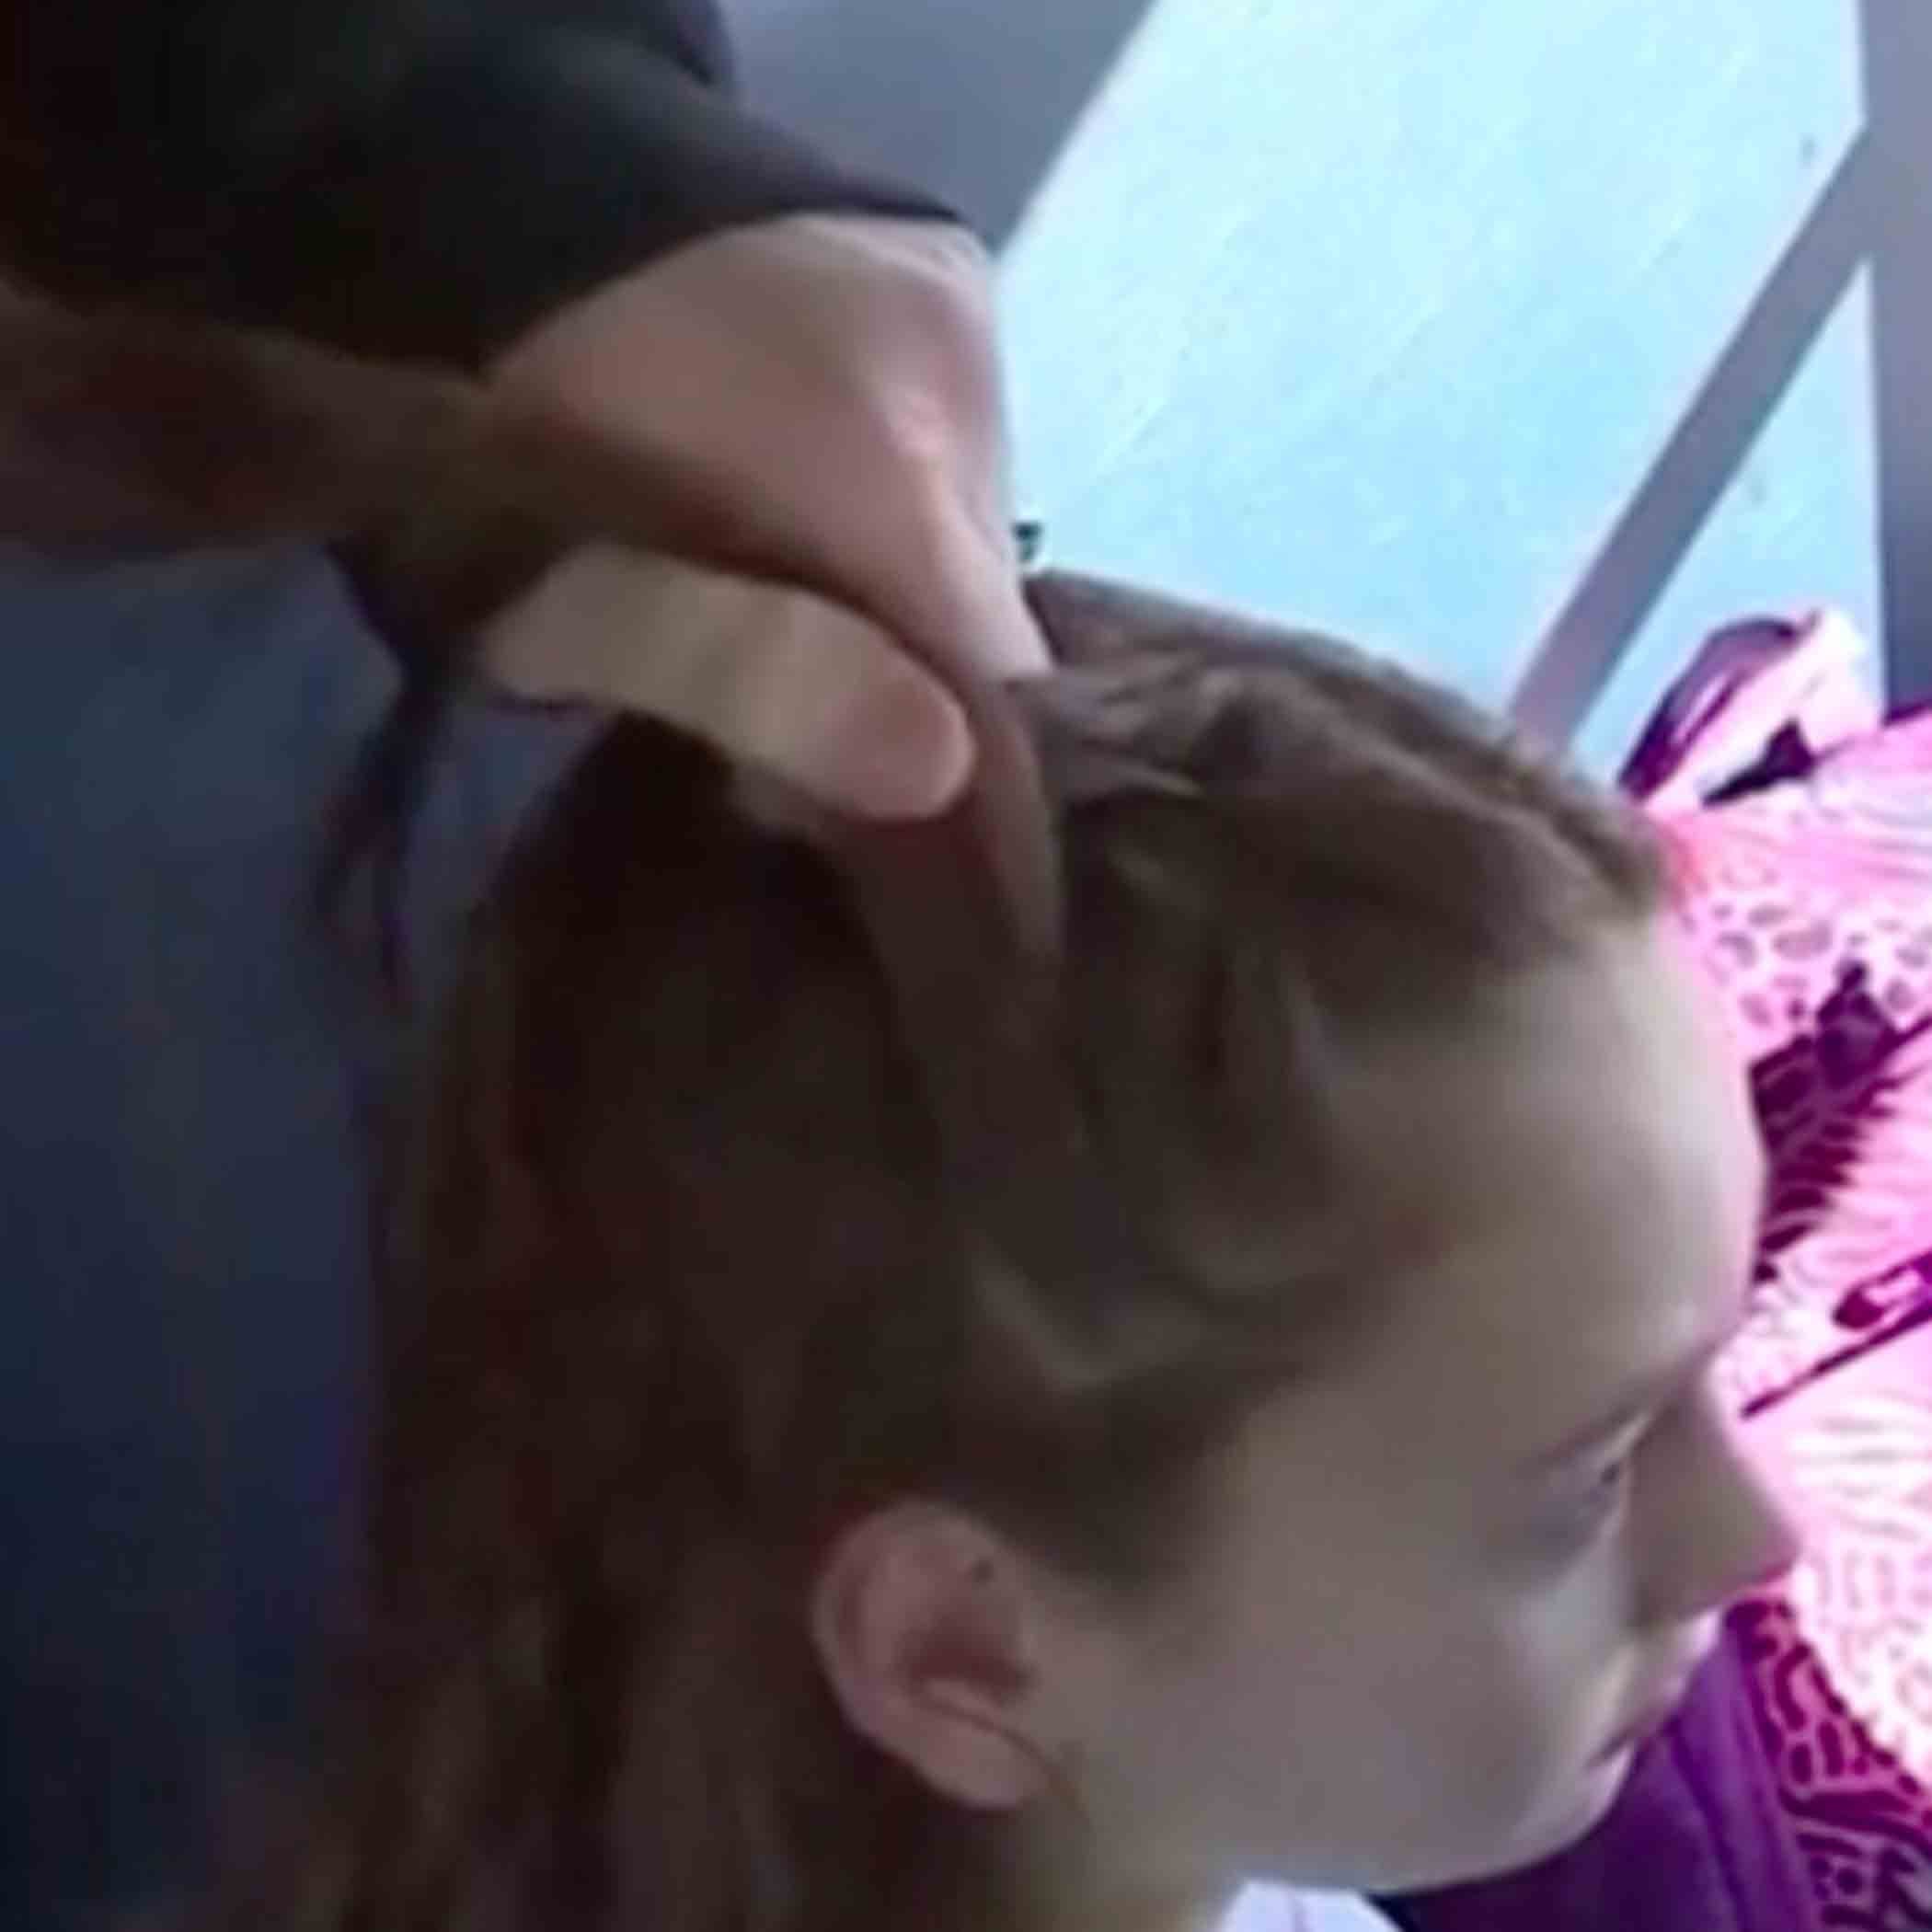 Bus driver steps in to braid girl's hair after her mother dies